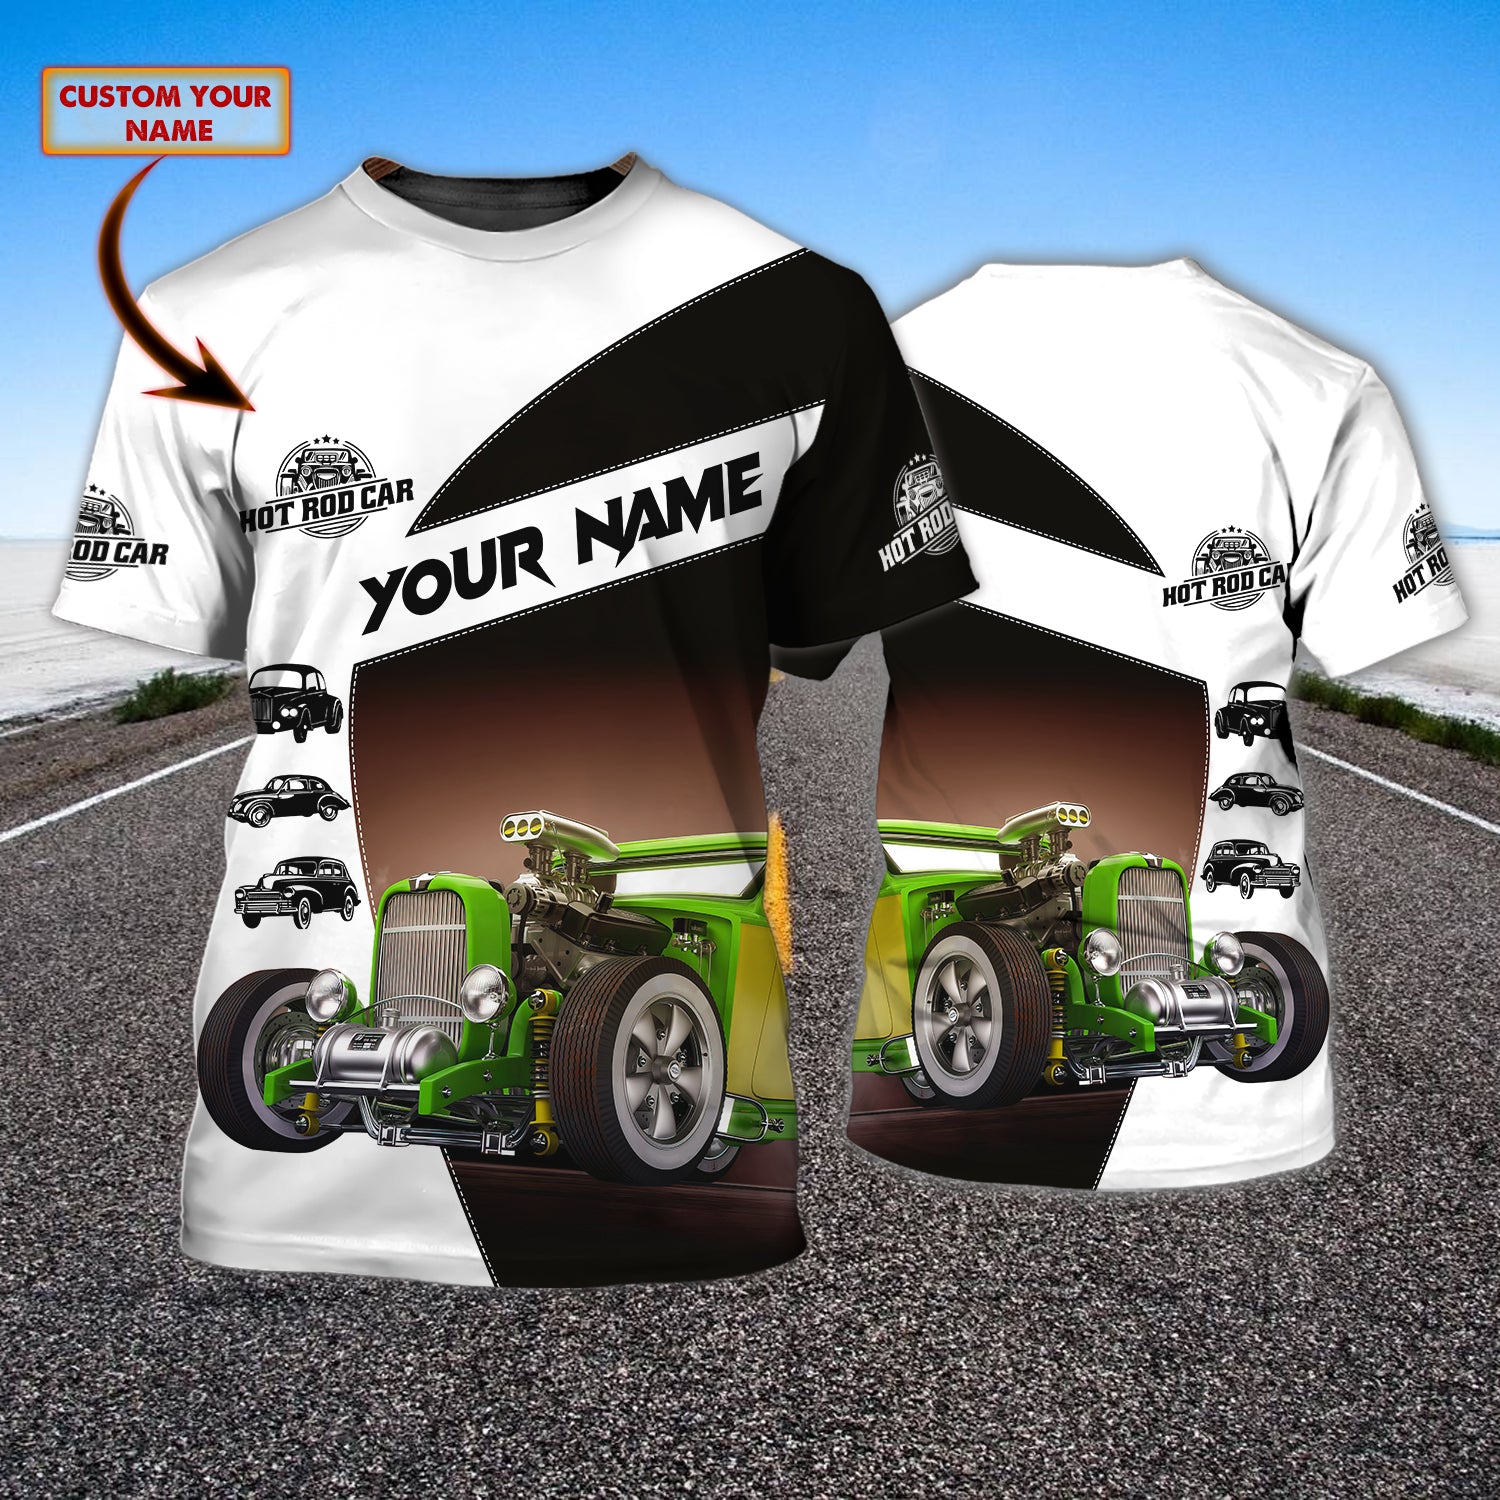 Hot Rod Car - Personalized Name 3D Tshirt - Tad 13